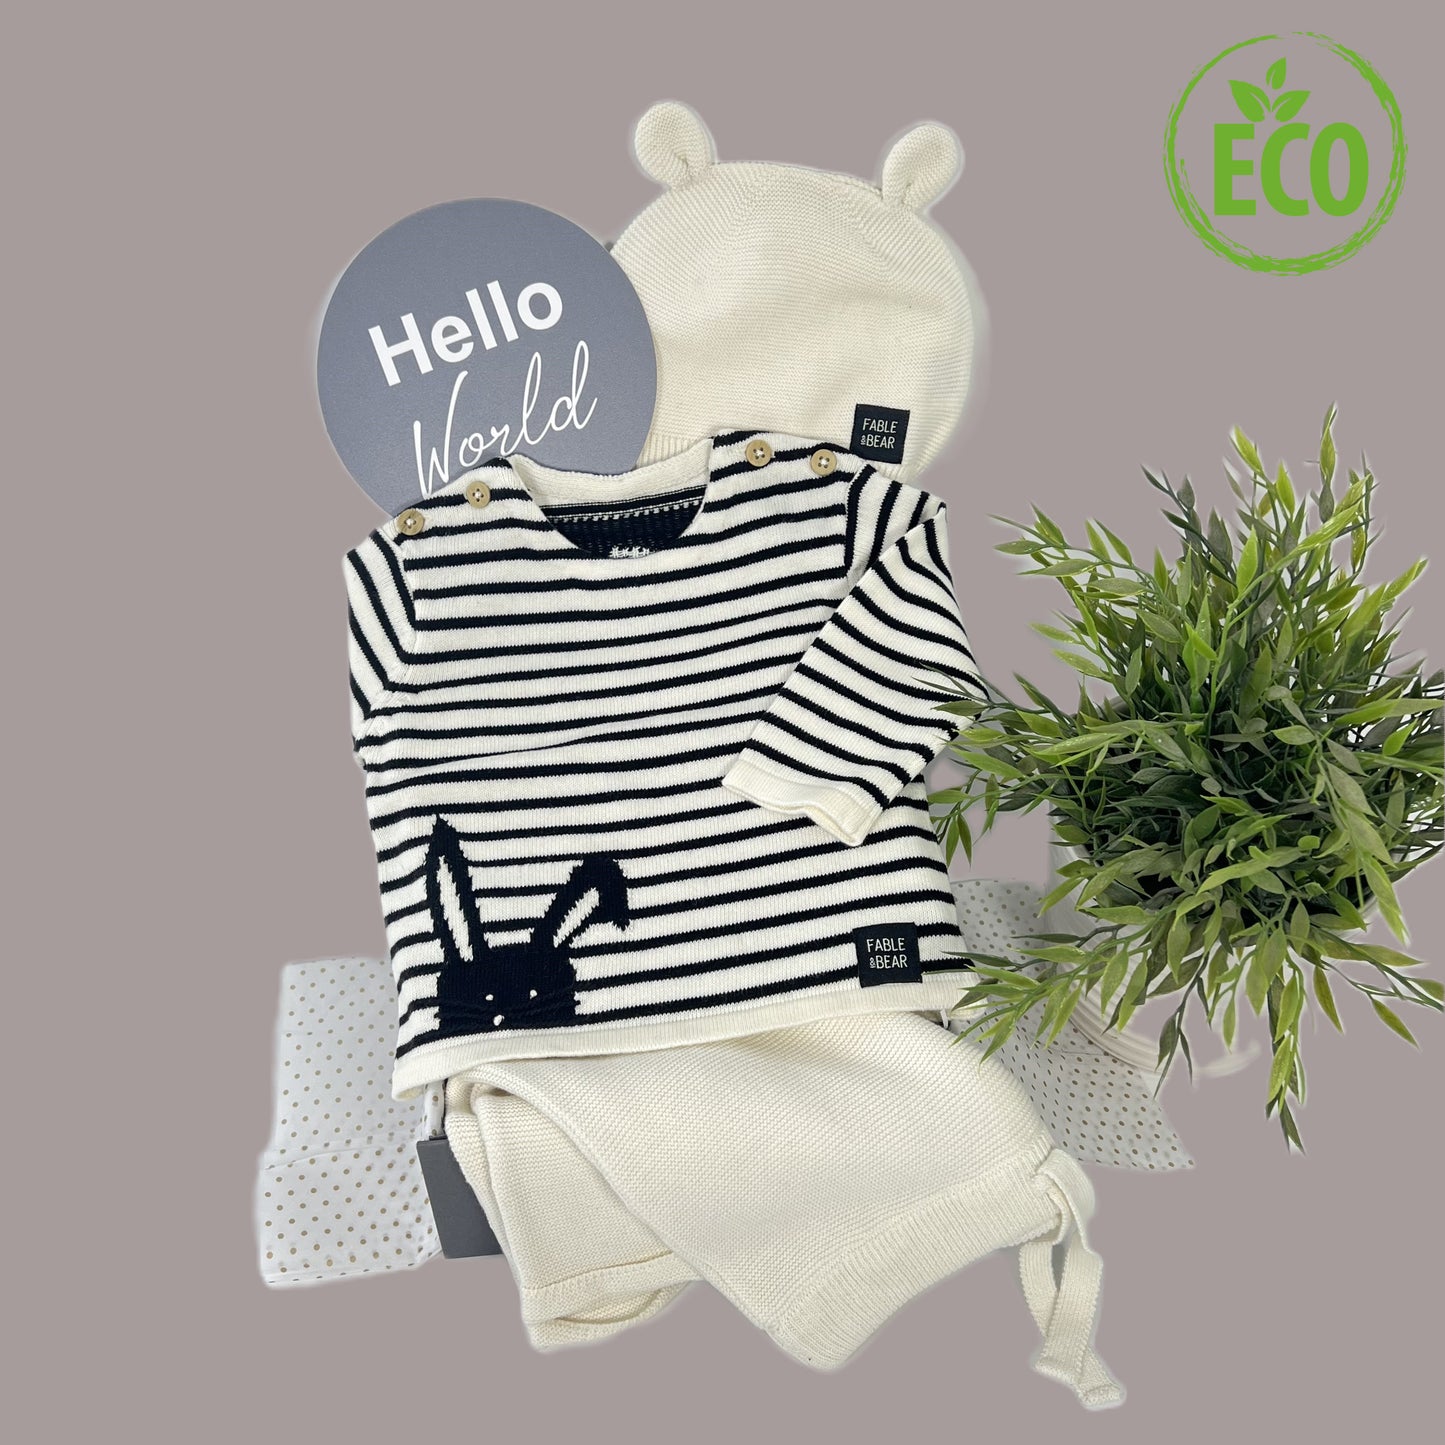 This luxury neutral new baby gift organic cotton baby clothing set , a baby jumper with a bear face and hand stitched facial features, a matching baby hat and baby leggings, a cotton baby cellular baby blanket, a elephant Montessori baby rattle in beech , a lage "Hello world " photography disc and a white baby keepsake box.